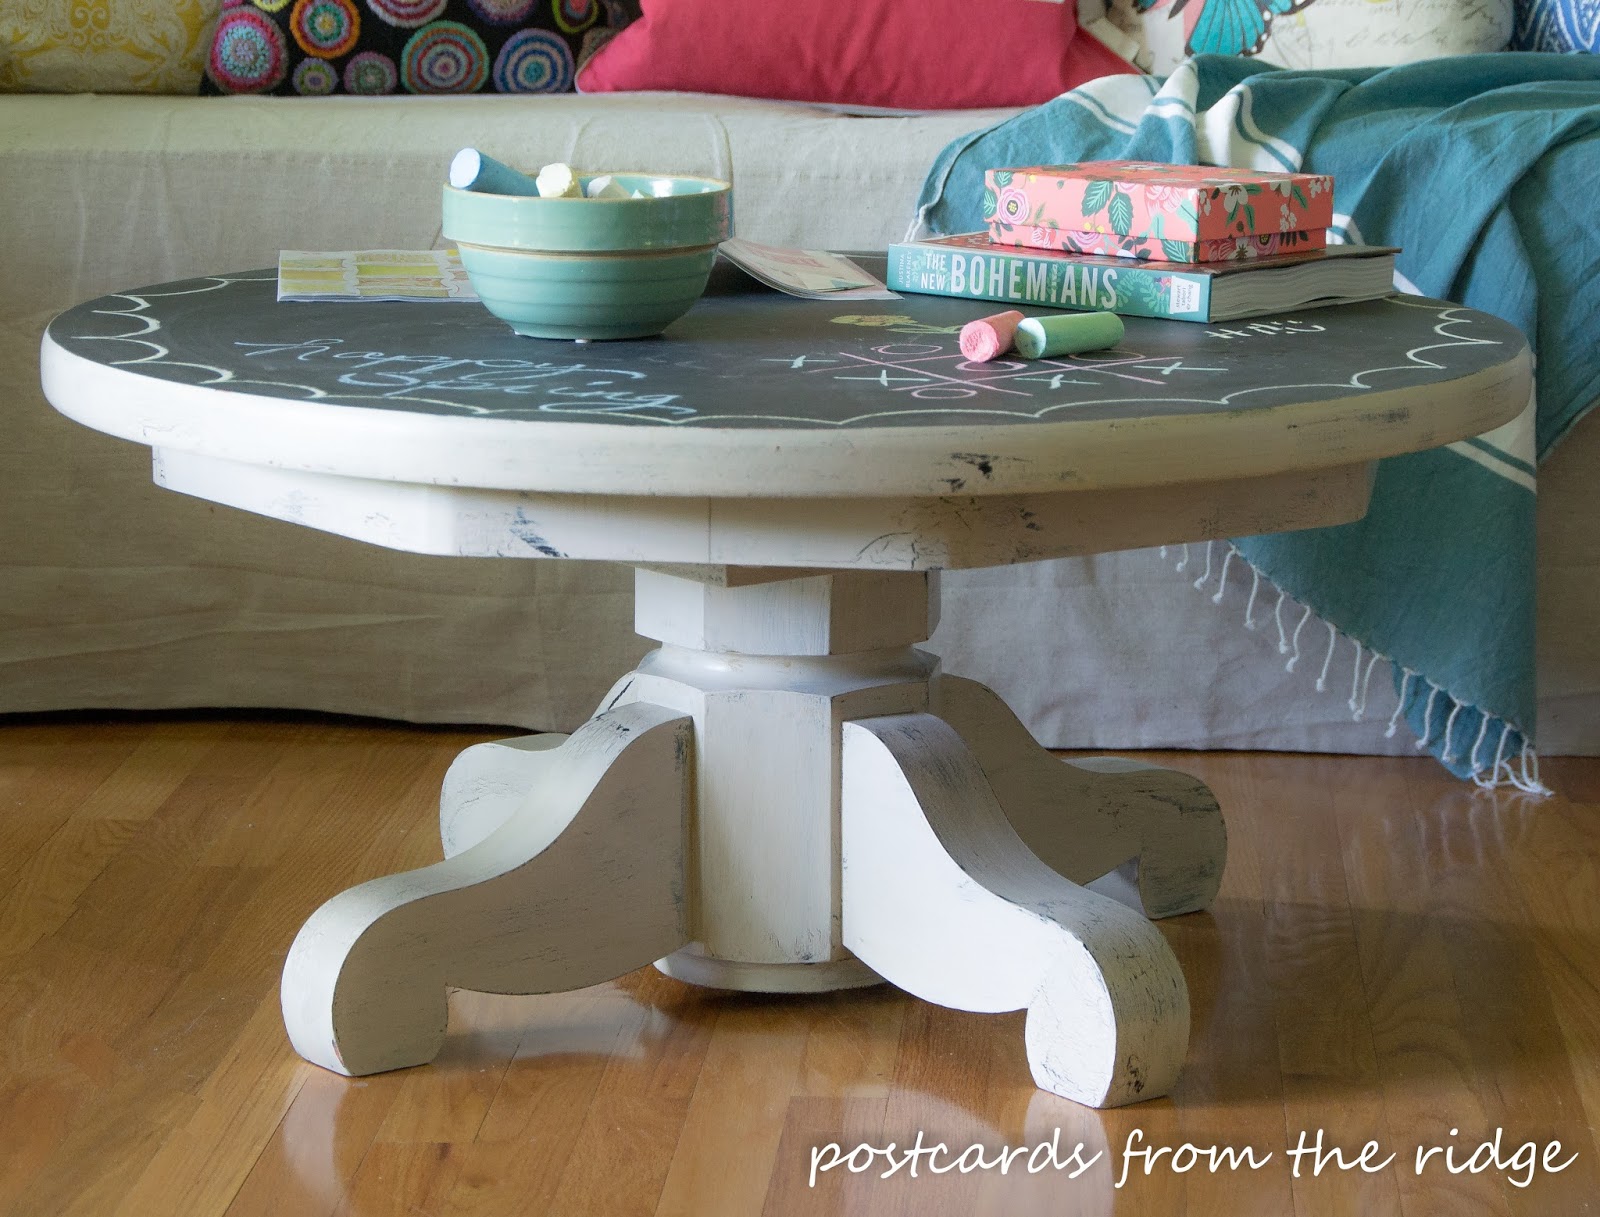 Painted Pedestal Table with chalkboard top inspired by Pottery Barn